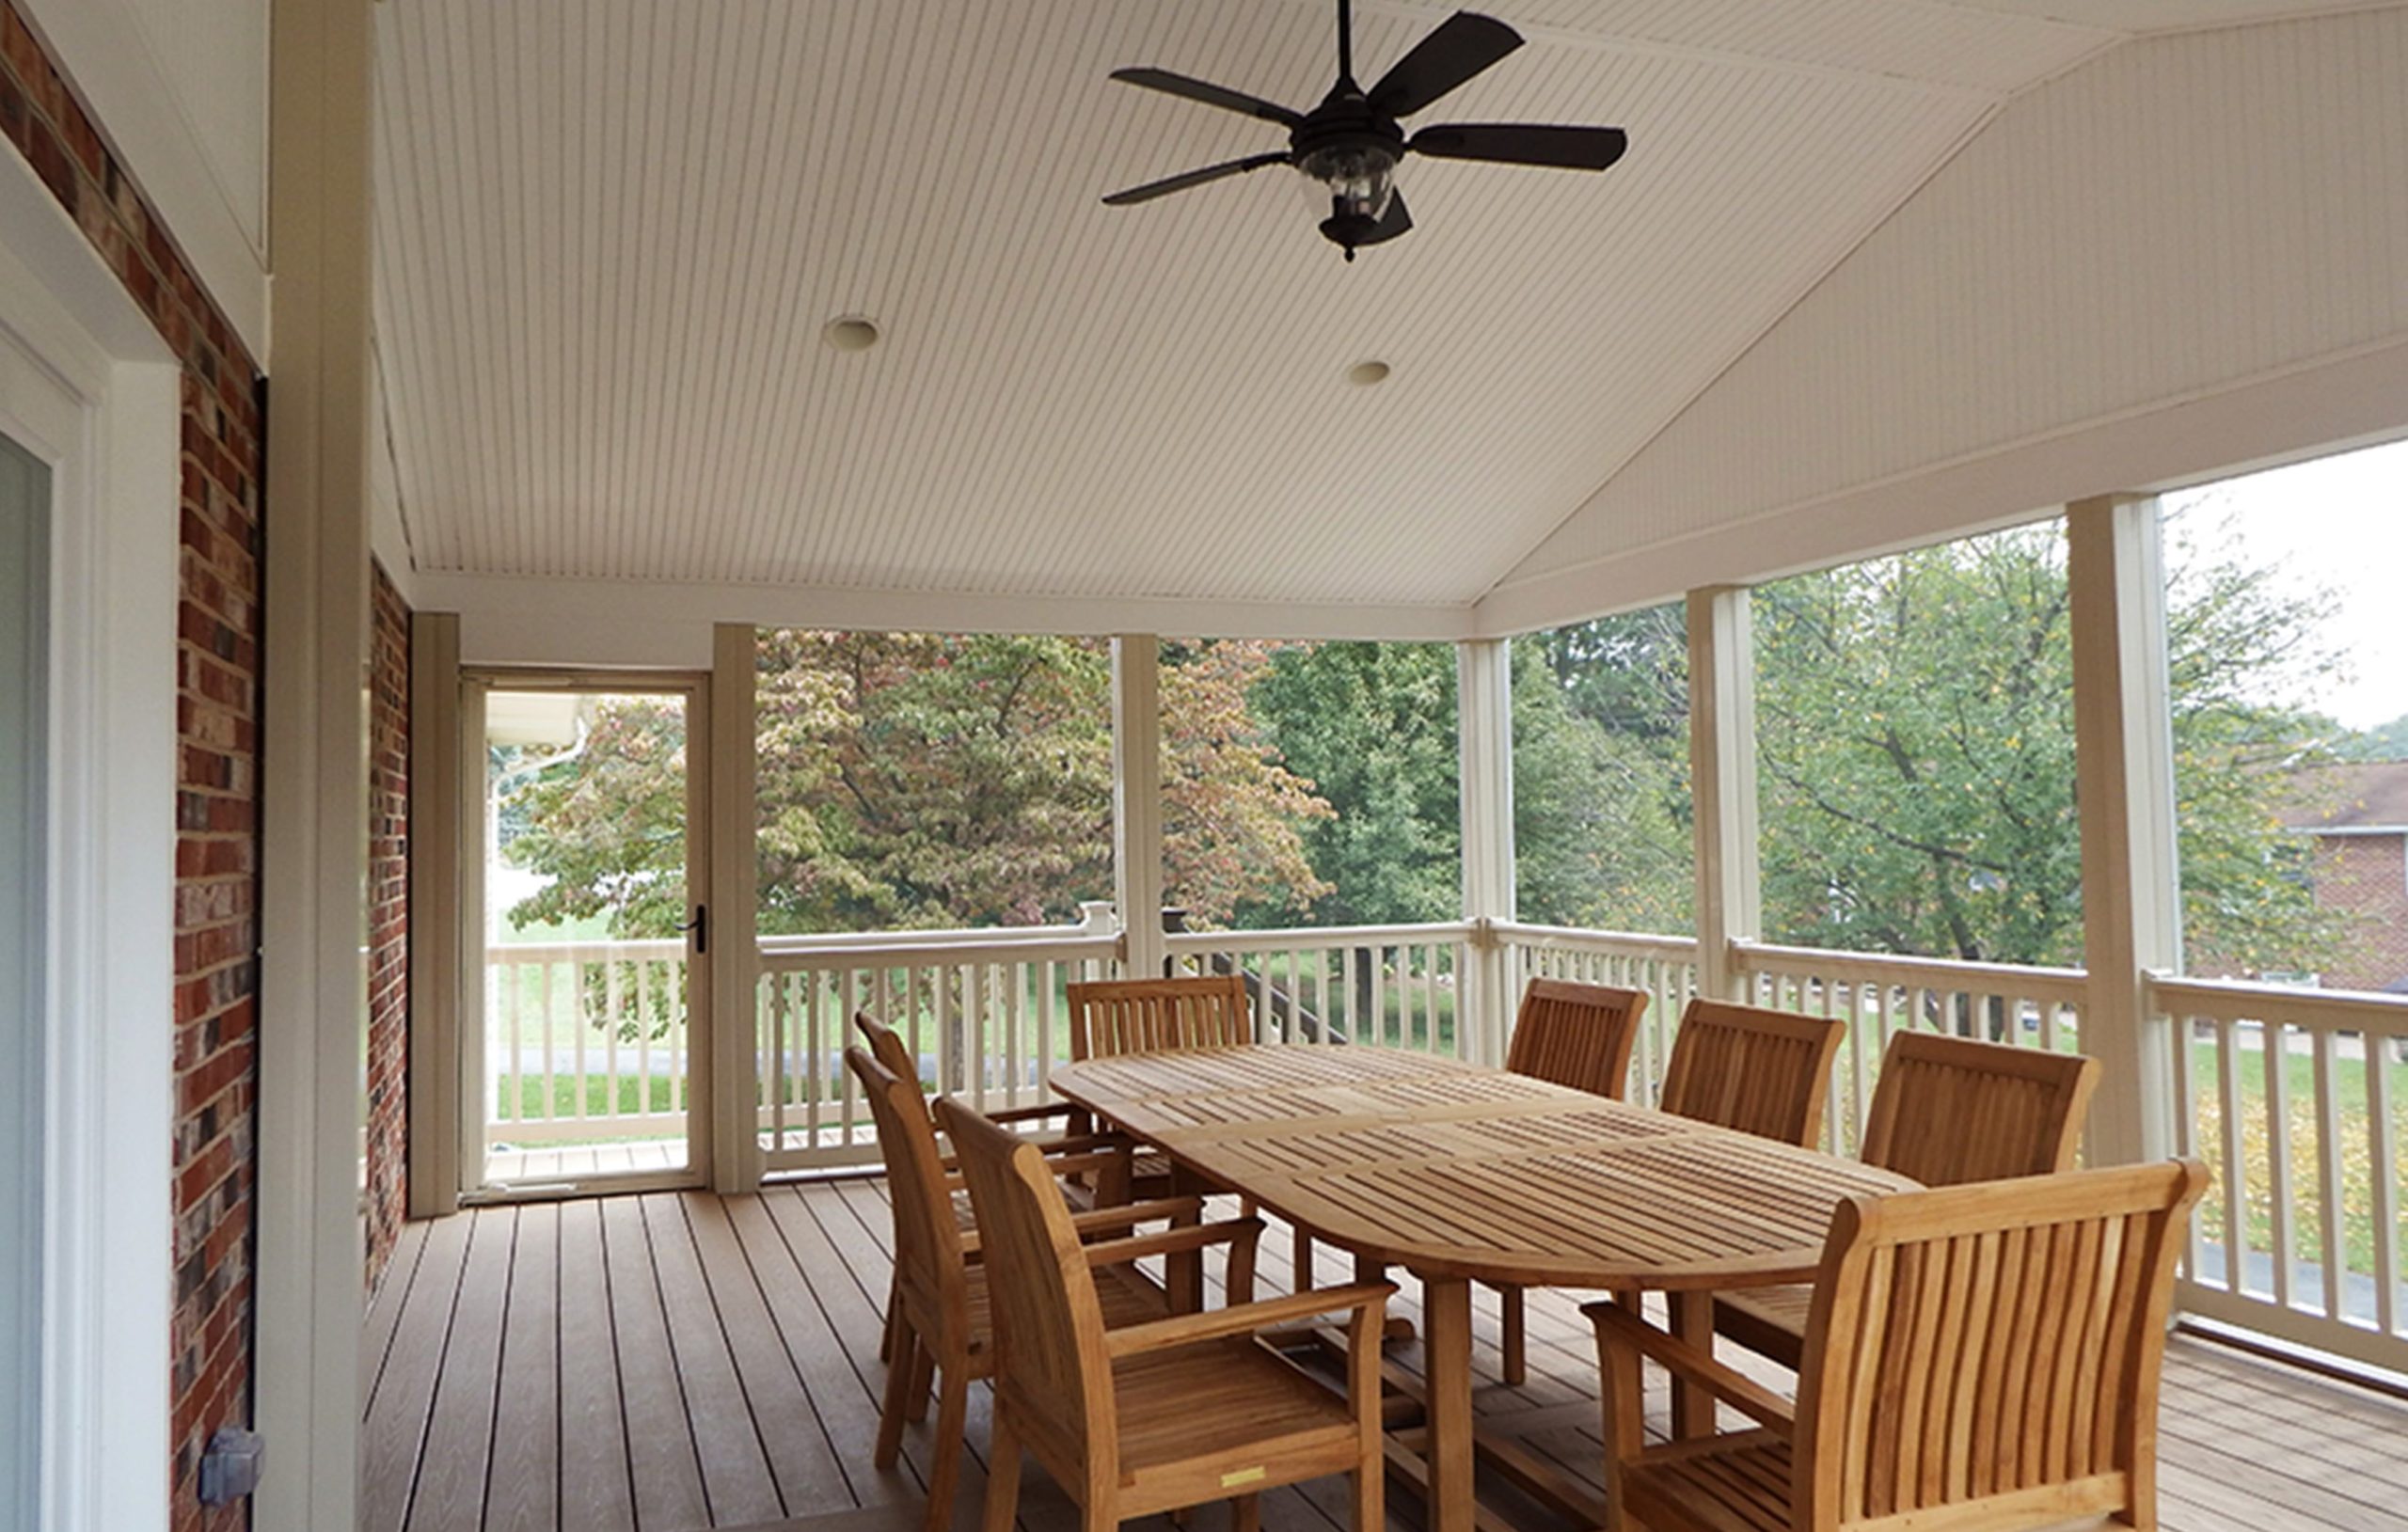 Wood deck screened in sun room added onto residential home